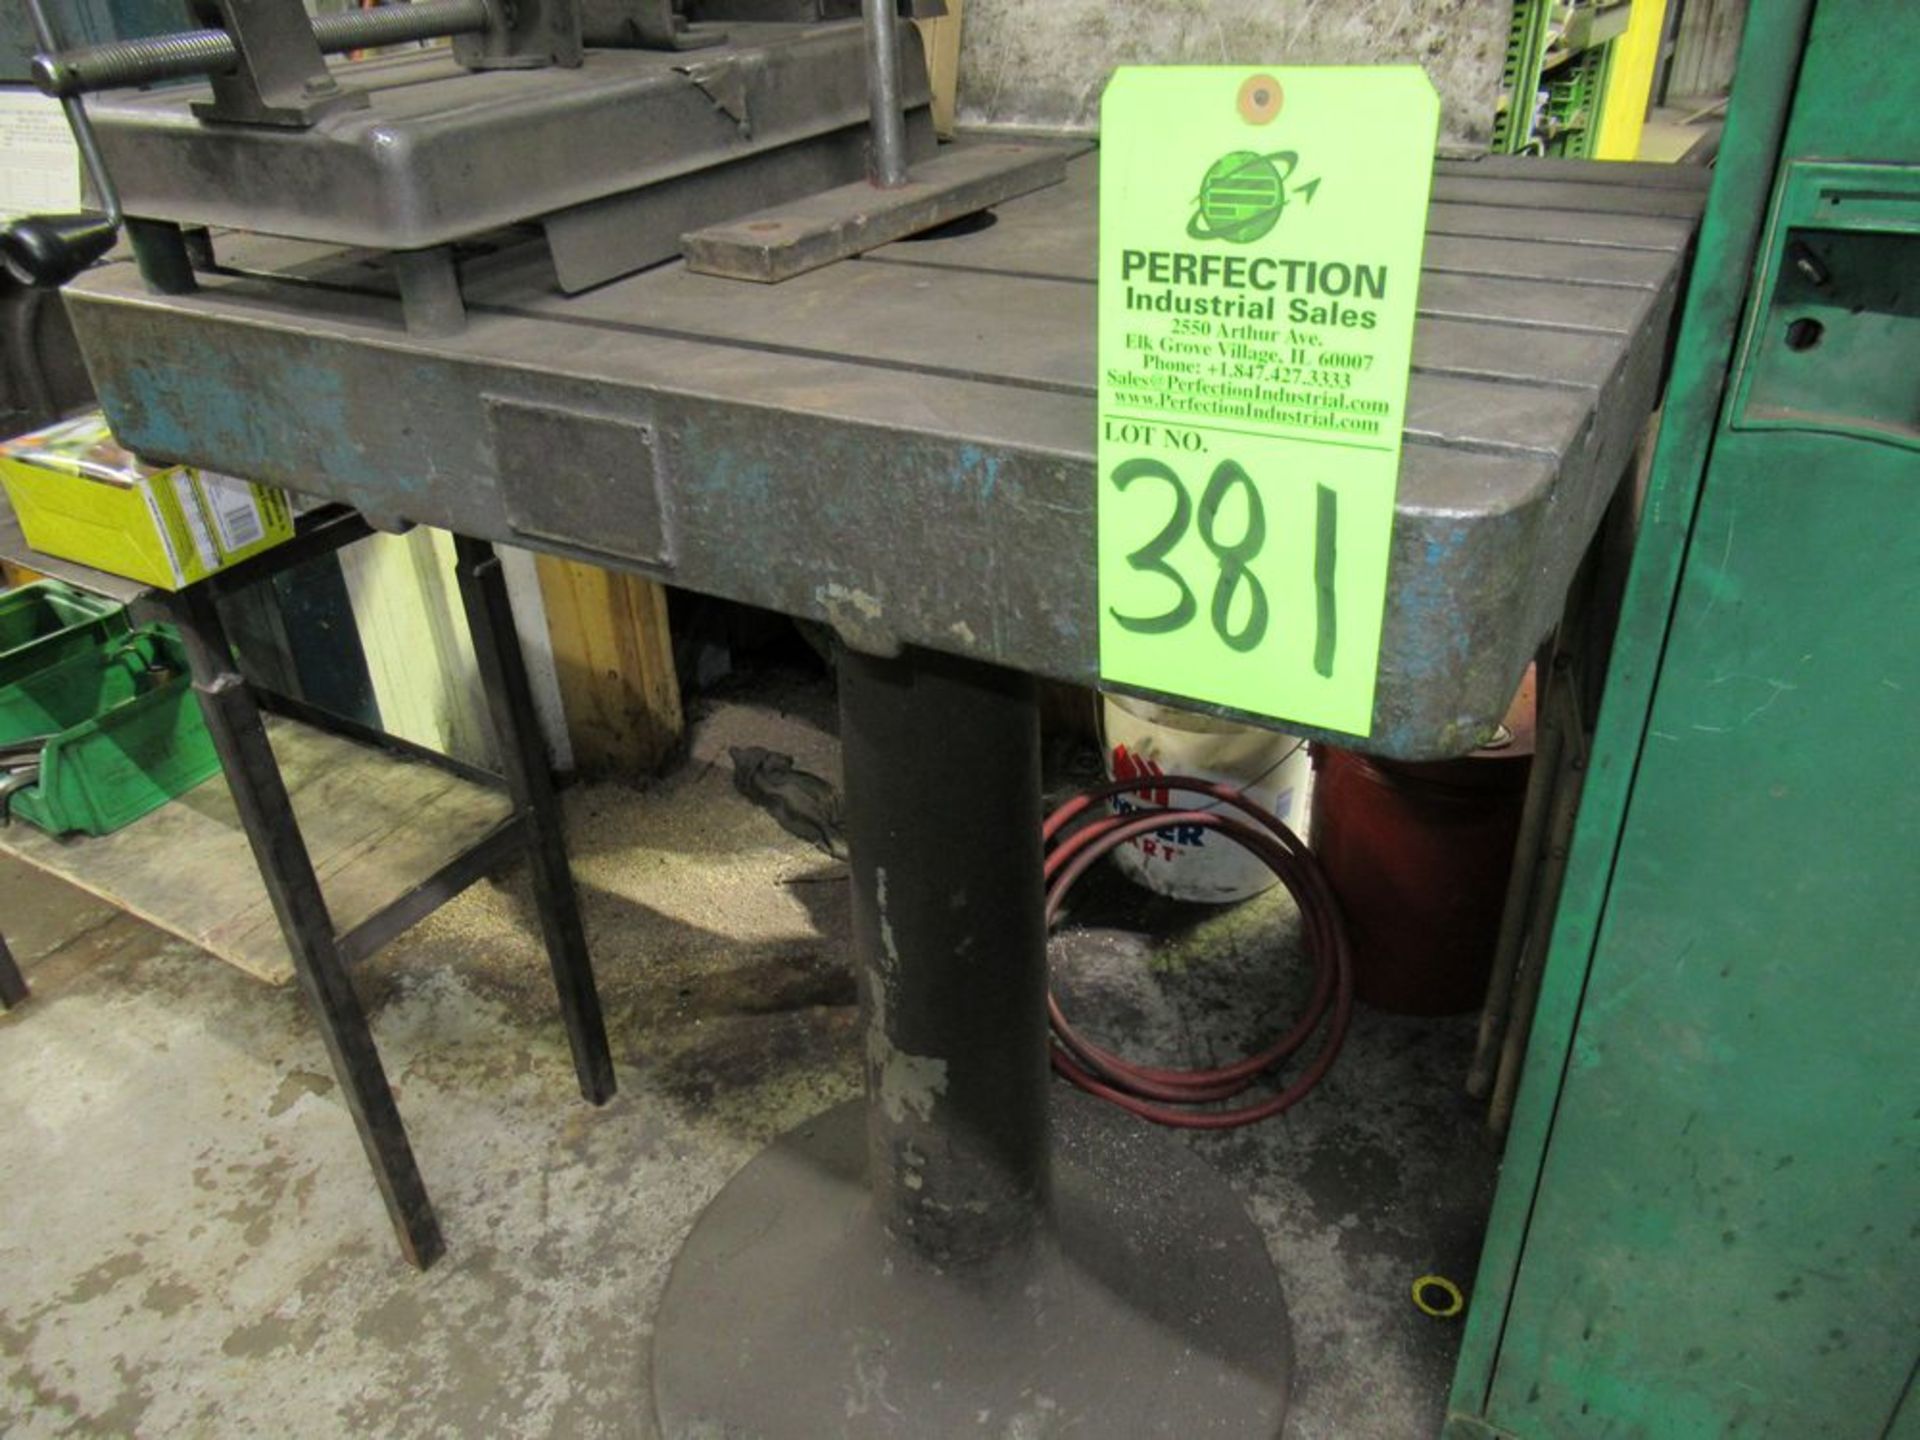 Pedestal T-Slot Welding Table Approx. 24 x 30" ($75 Rigging Cost) - Image 2 of 2